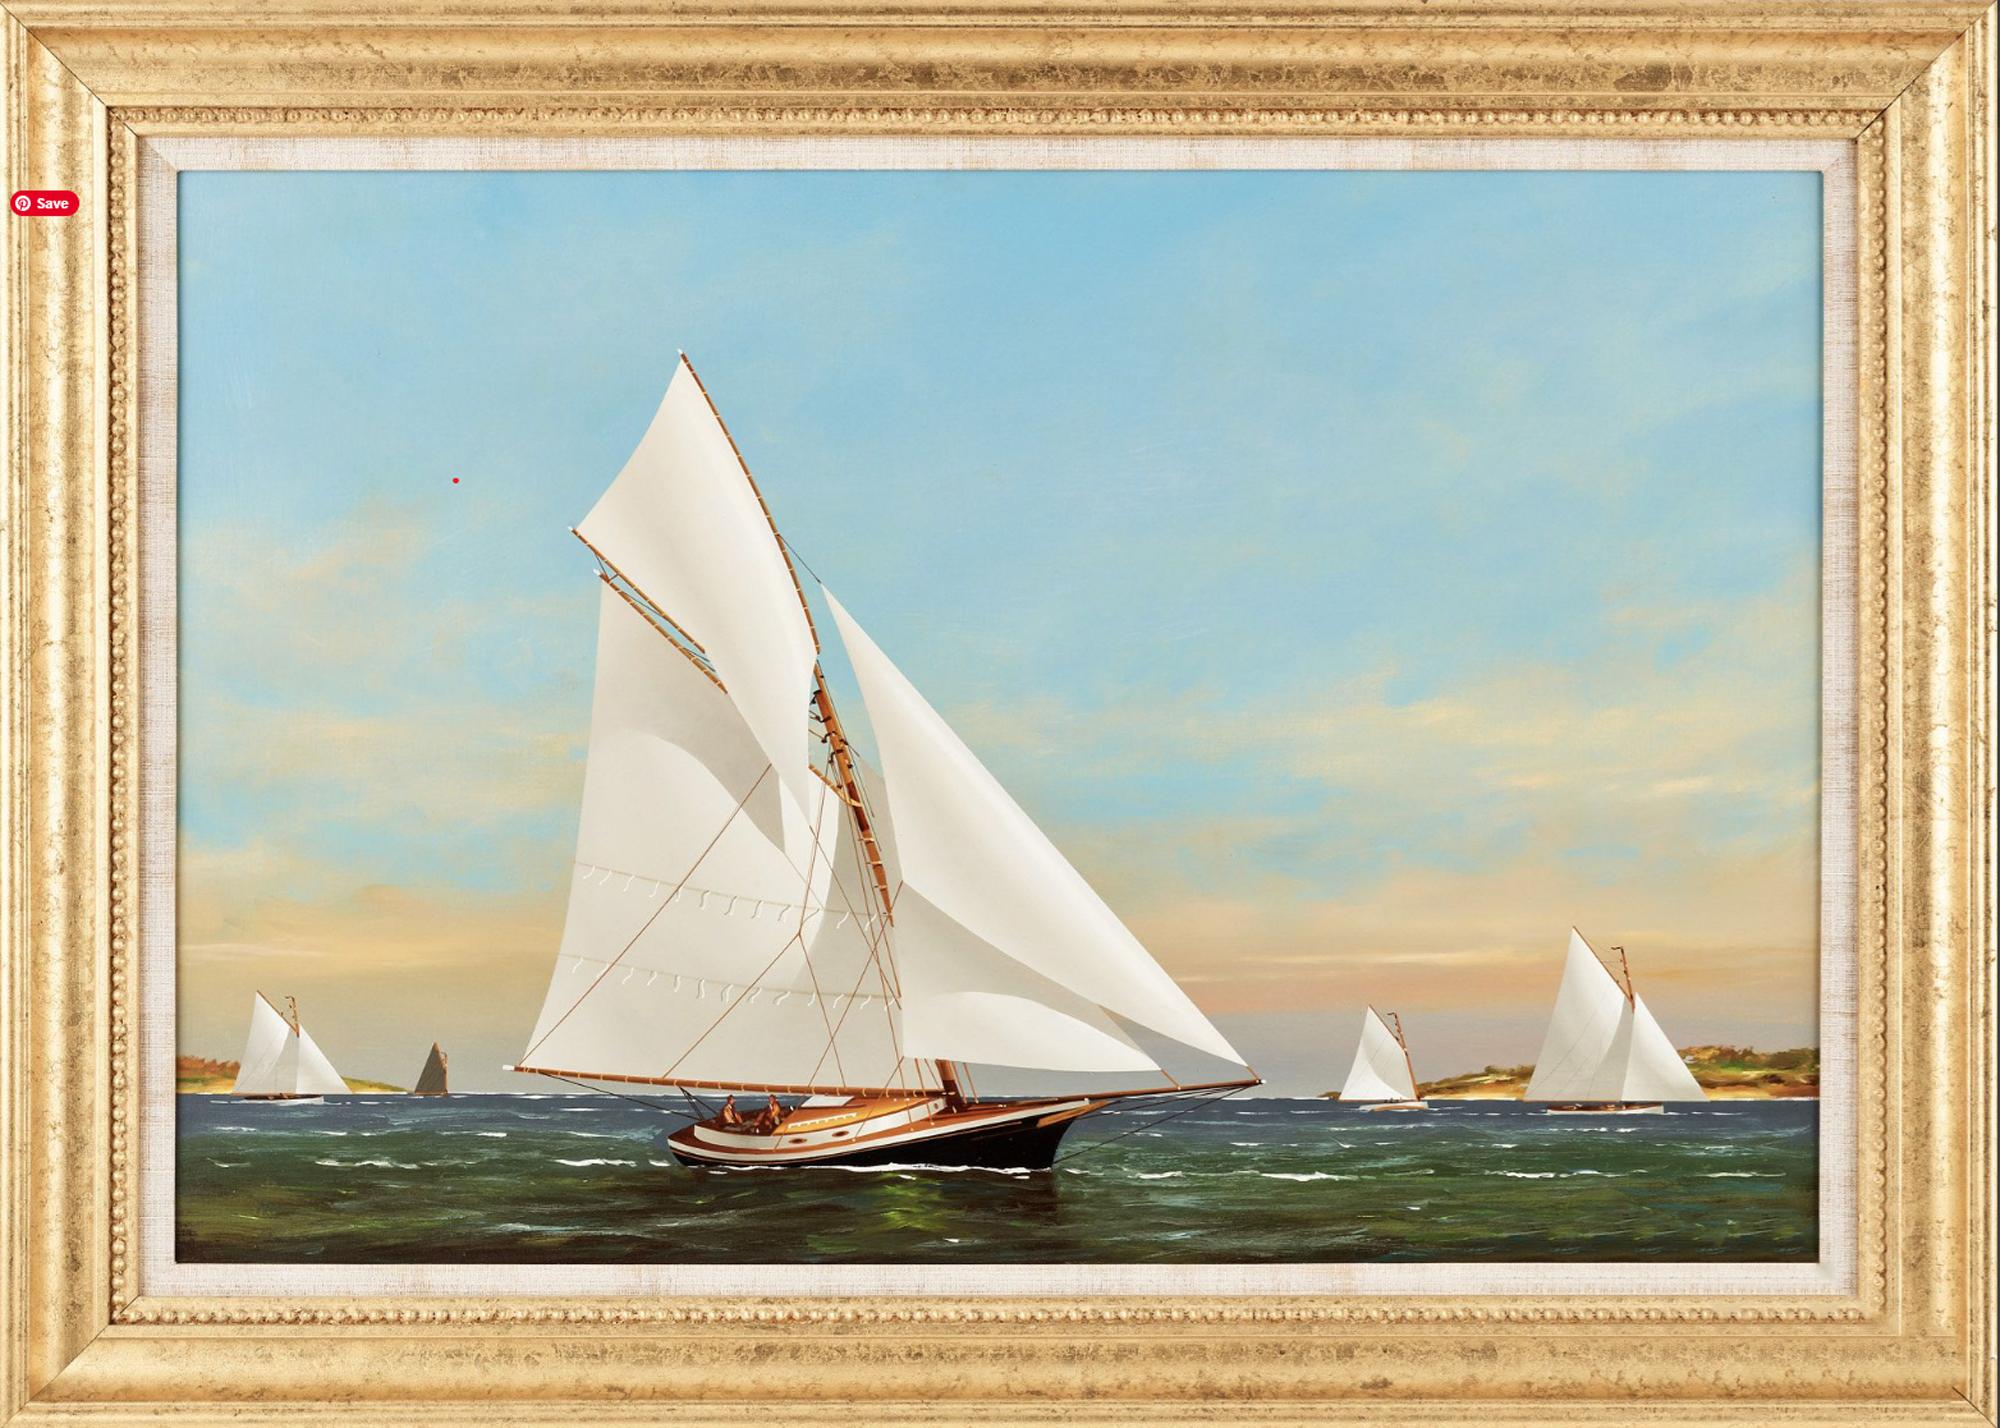 Yacht Racing off Cape Cod,
Vernon Broe (American 1930-2011), 
oil on board

A fine example of Vernon Broe work depicting a yacht race off Cape Cod, Massachusetts. Broe's marine opaintings, like this one are in a realistic, impressionist